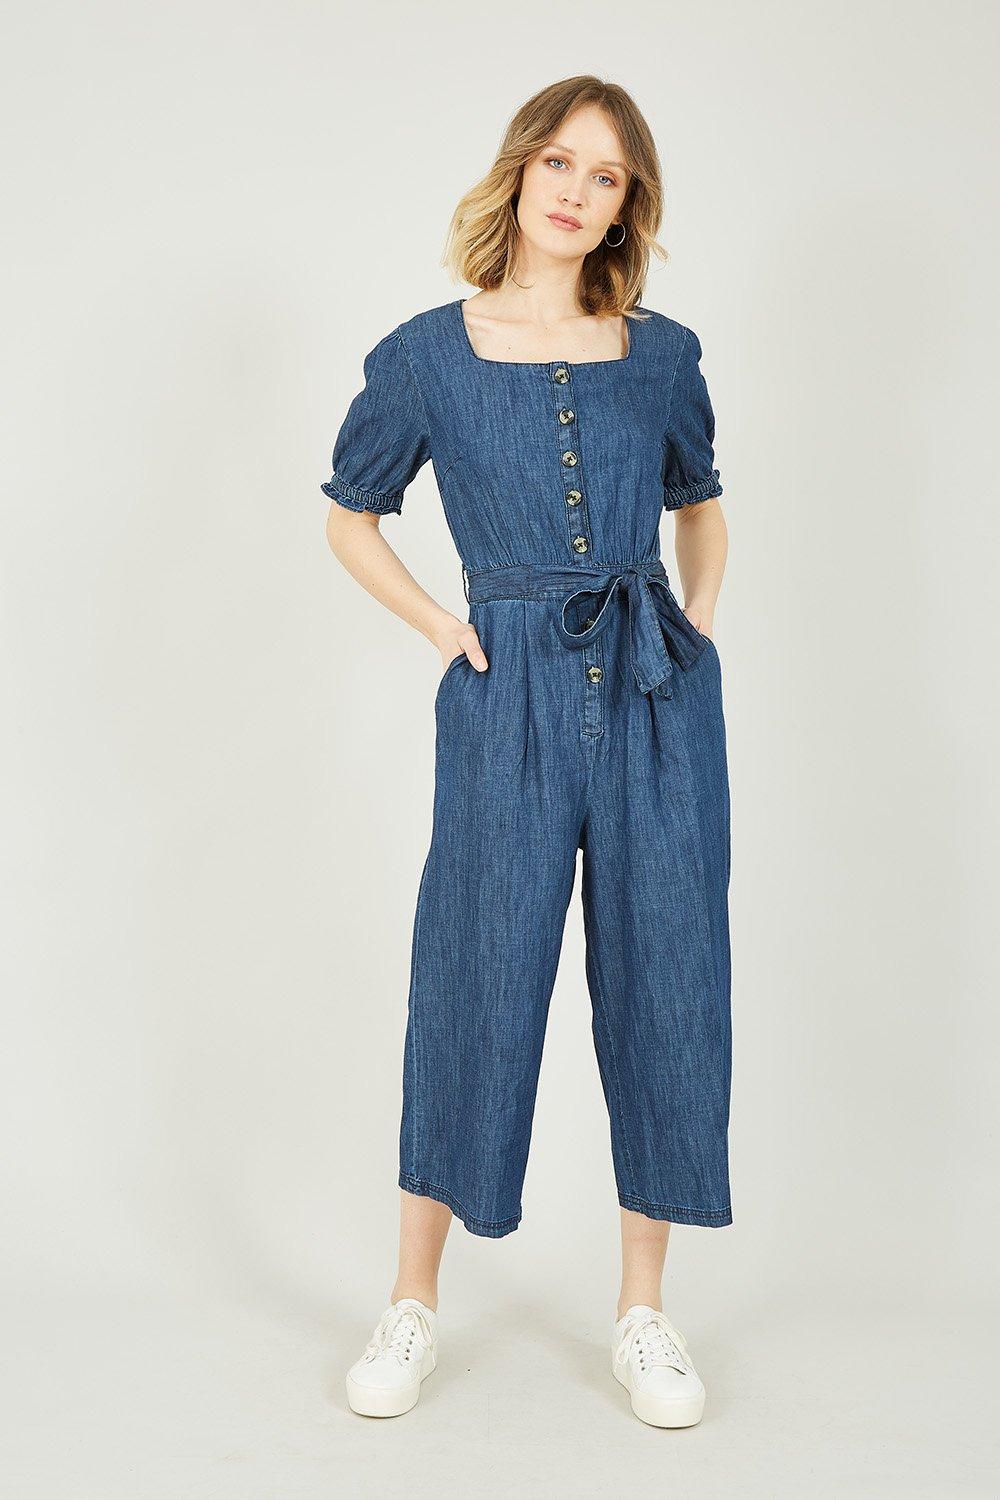 Blue Denim Jumpsuit With Puffy Sleeves